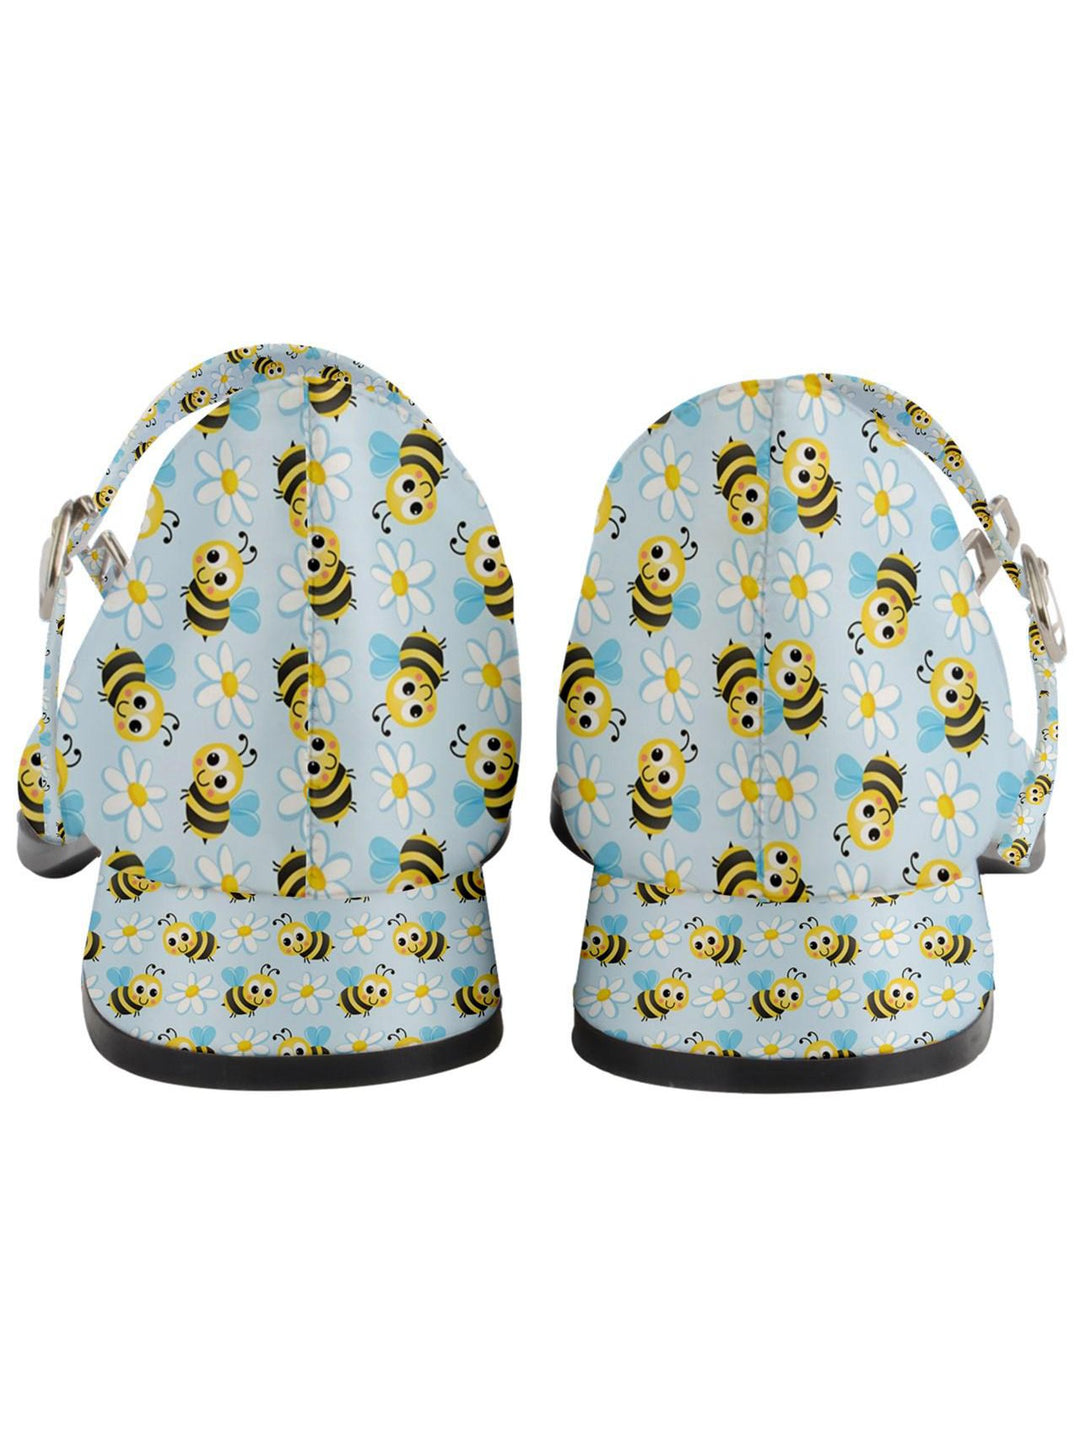 Bumblebees Women's Mary Jane Shoes